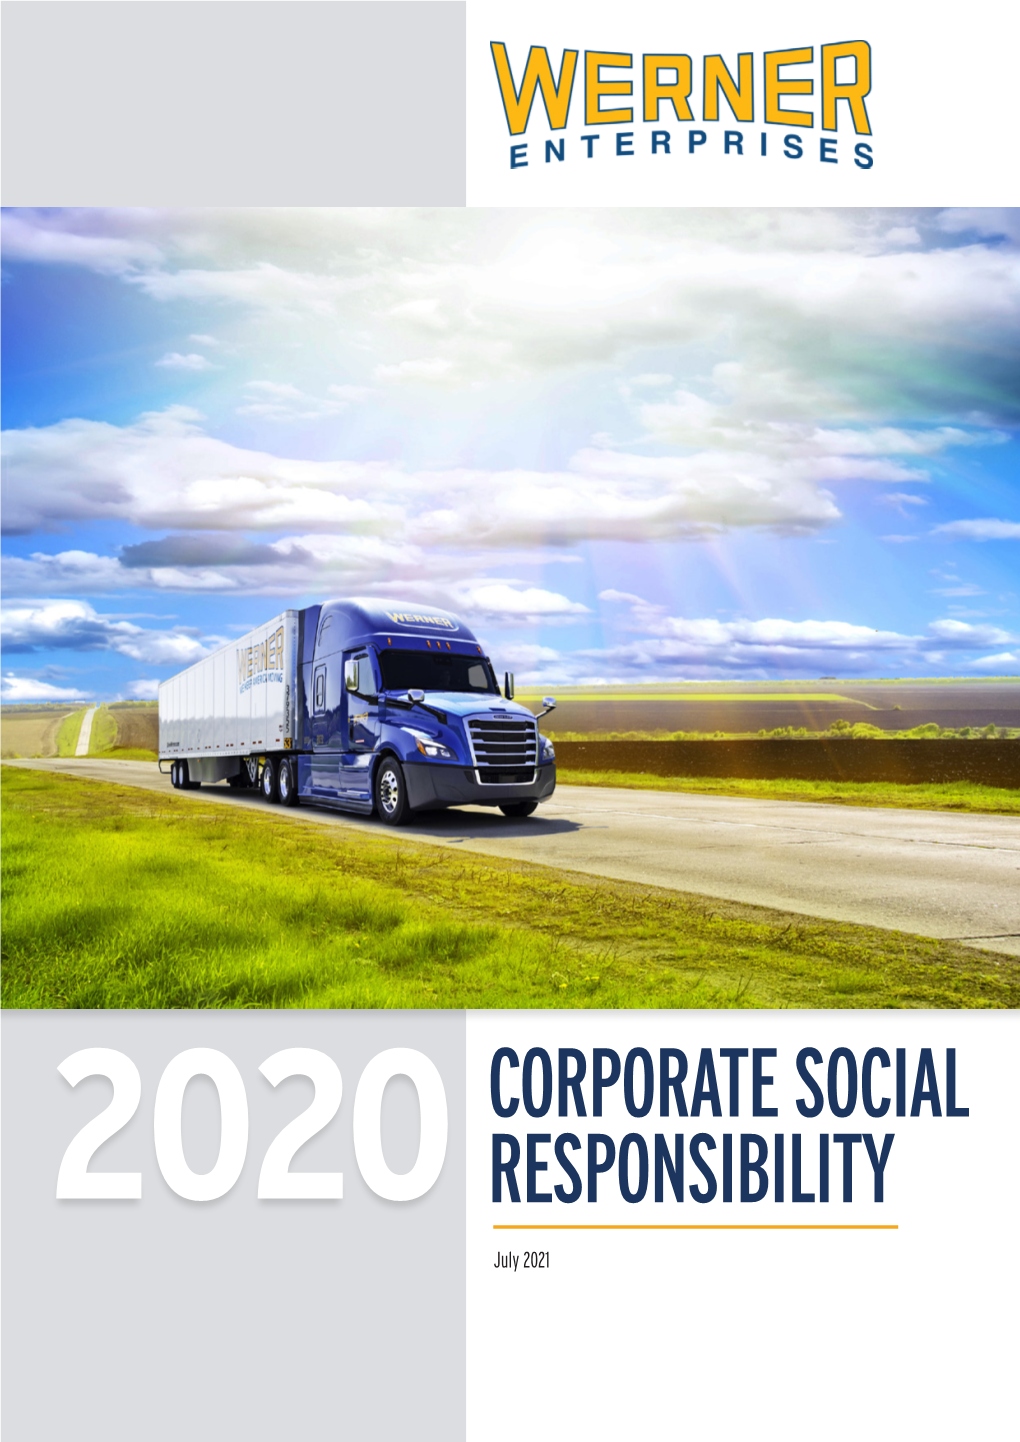 Werner 2020 Corporate Social Responsibility